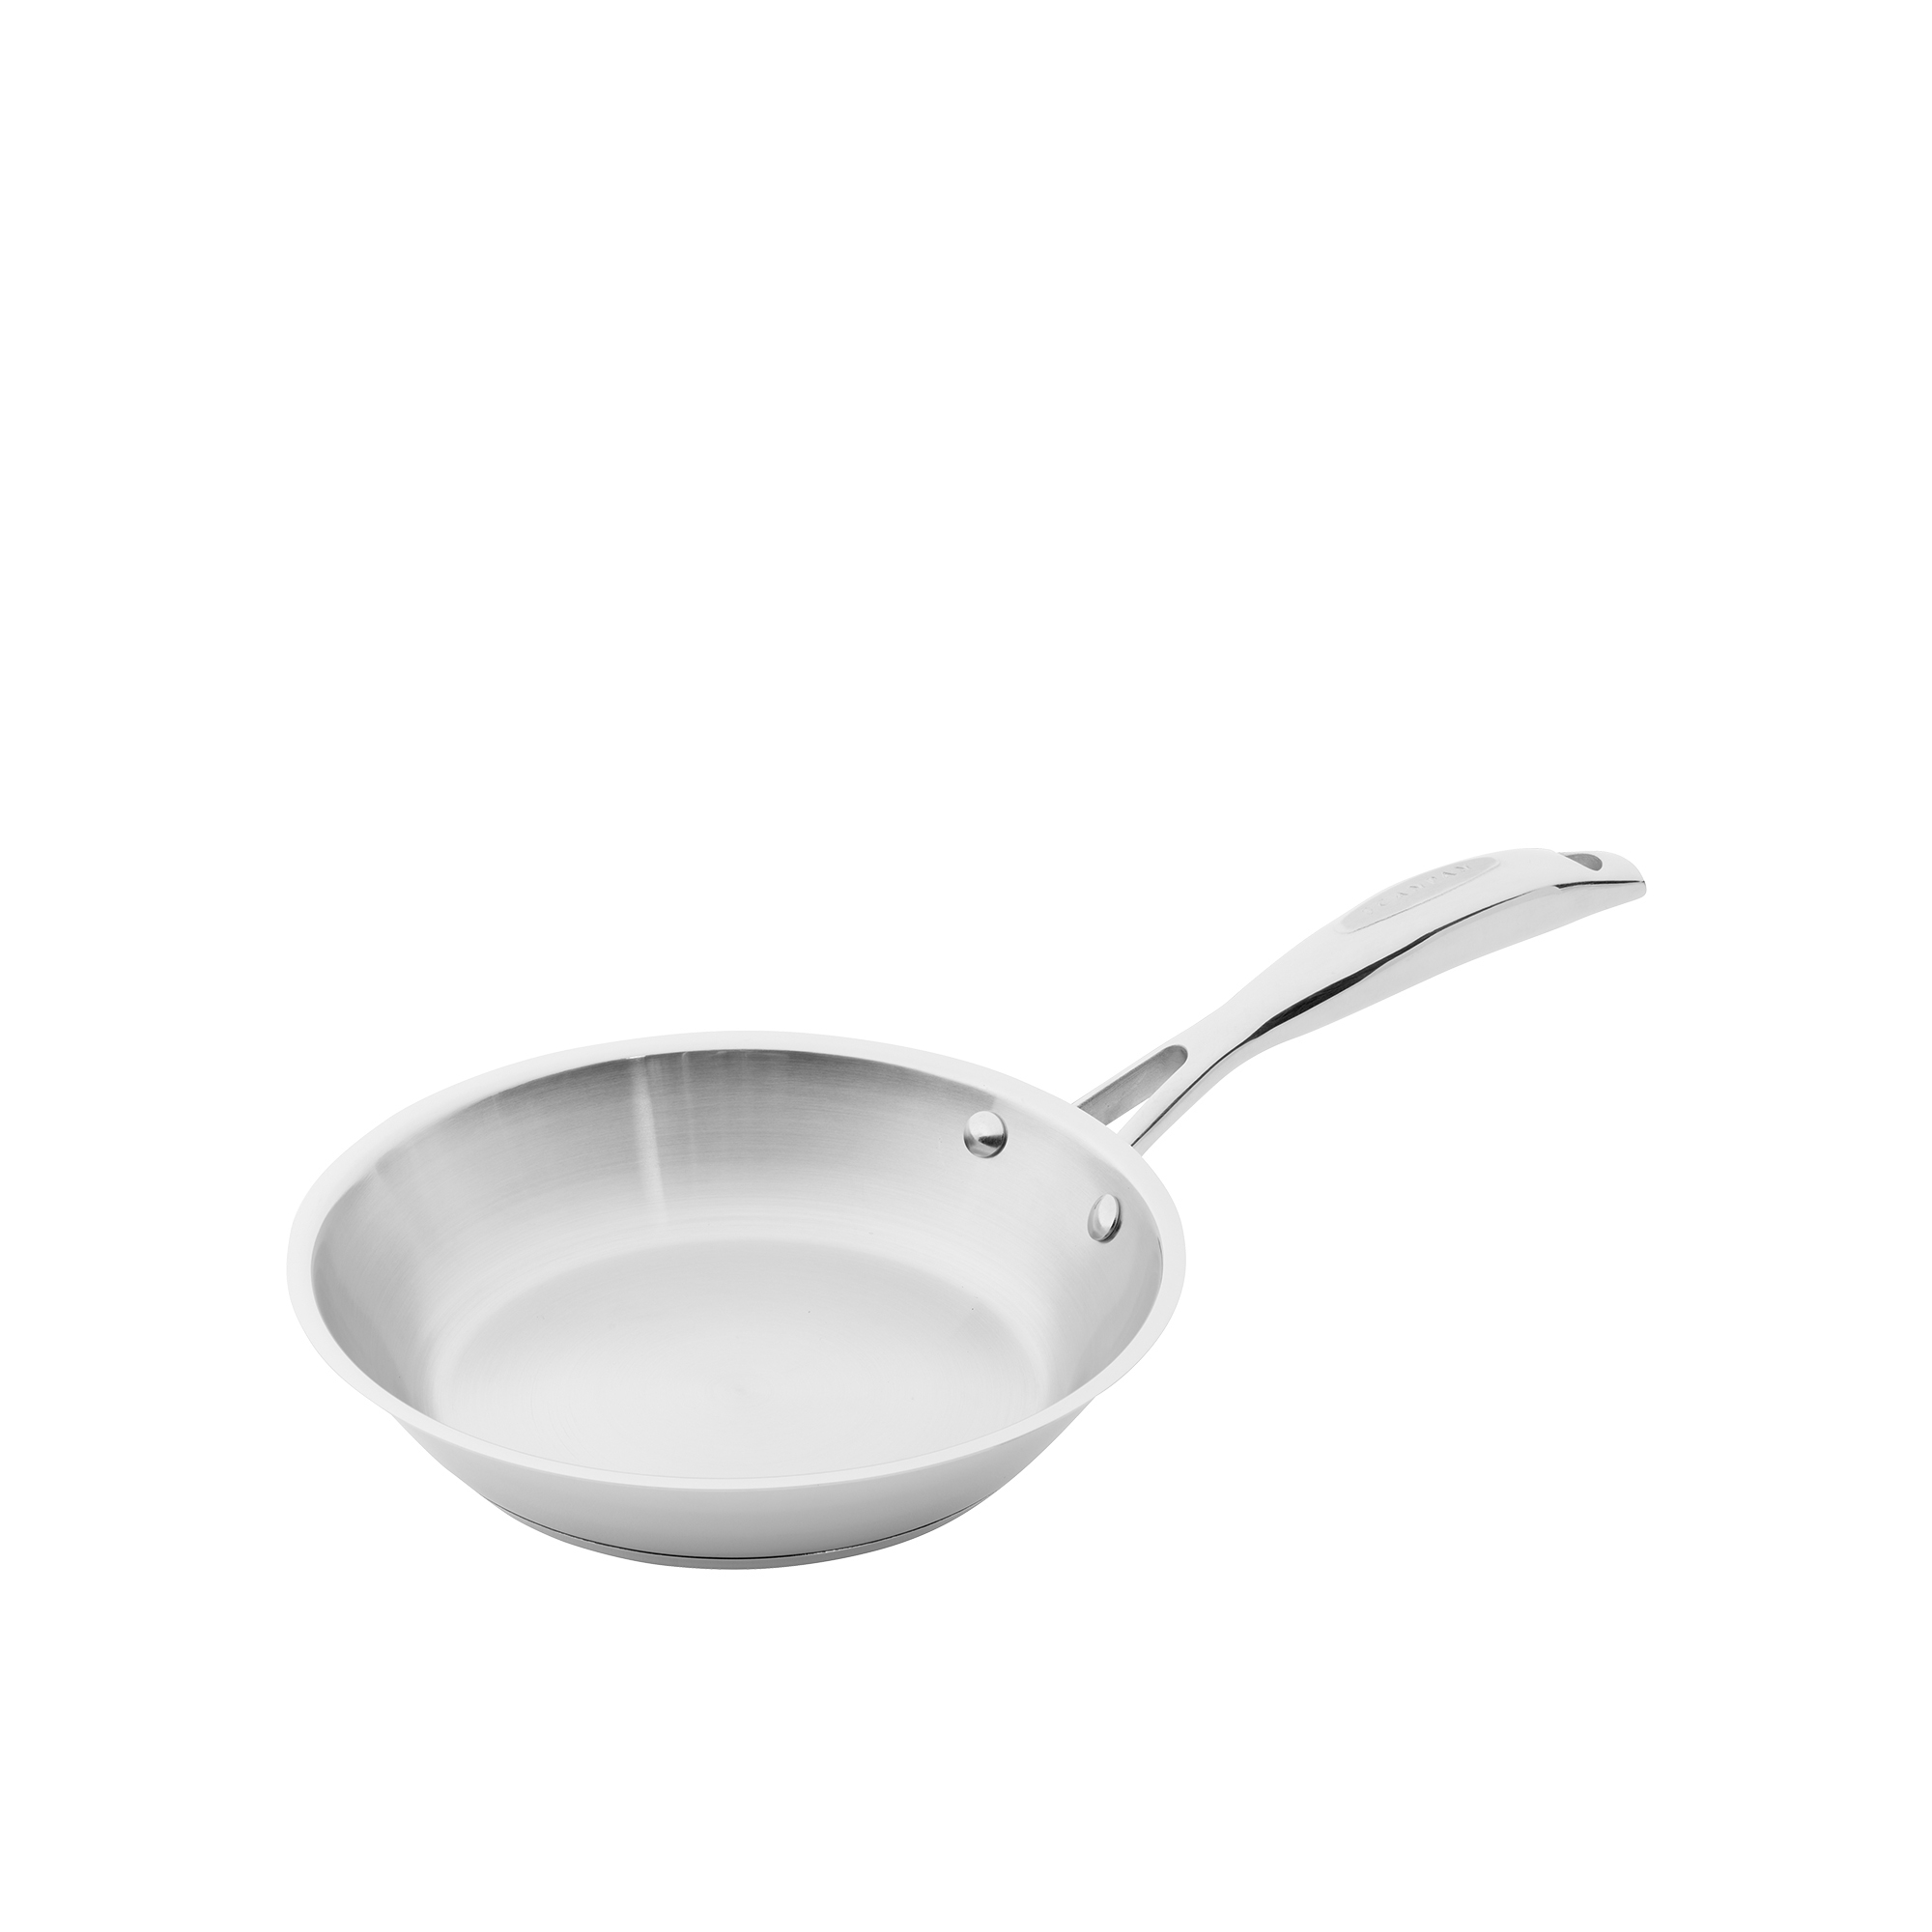 Scanpan STS Stainless Steel Frypan 20cm Image 1